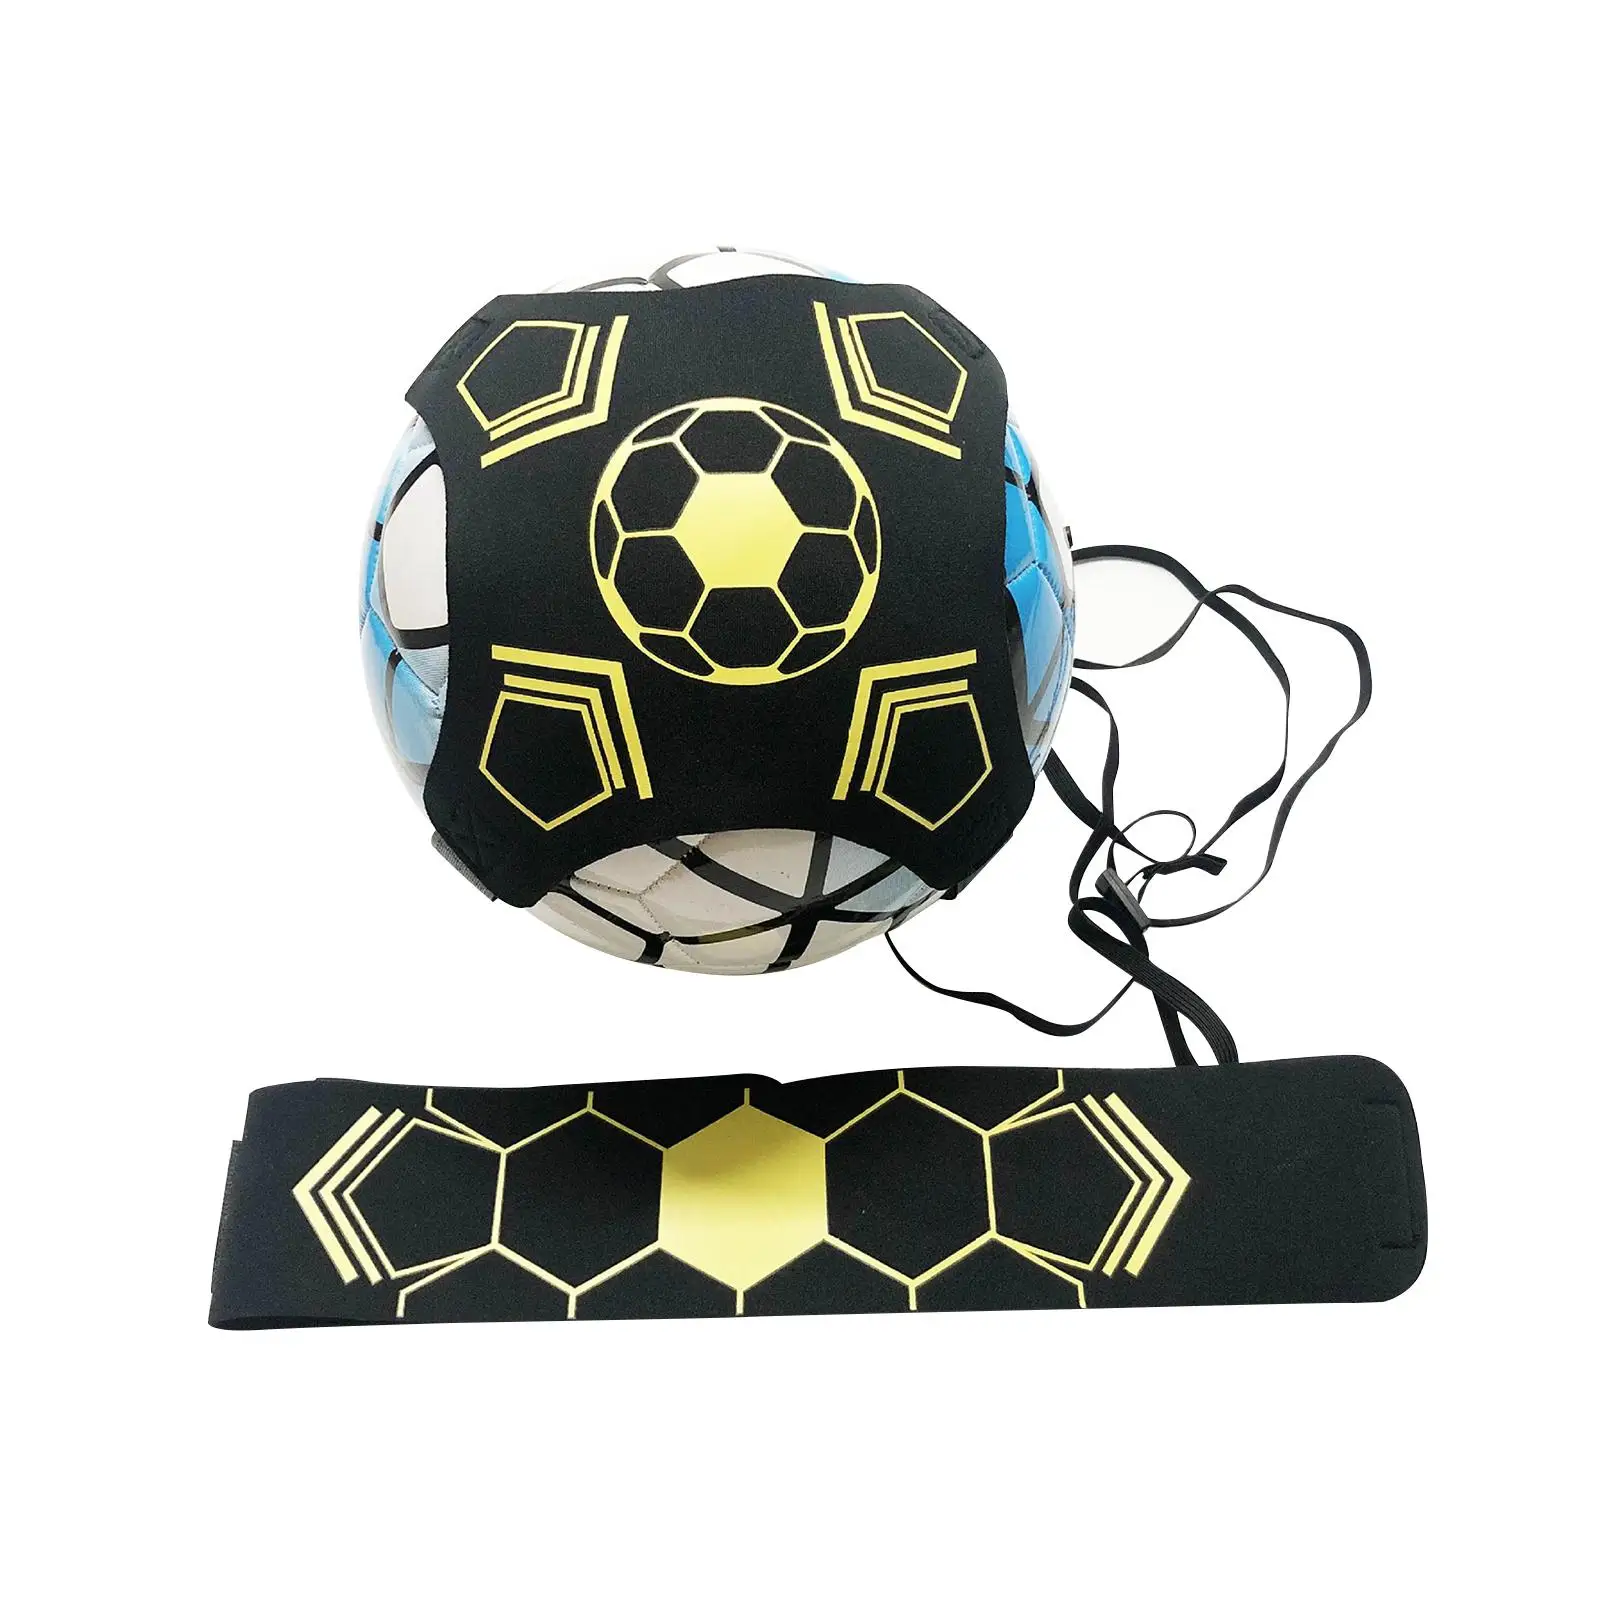 Kick Throw Solo Practice Training Aid Equipment Control Skills 1.8M Elastic Rope Soccer Trainer for Volleyball Rugby Game Ball